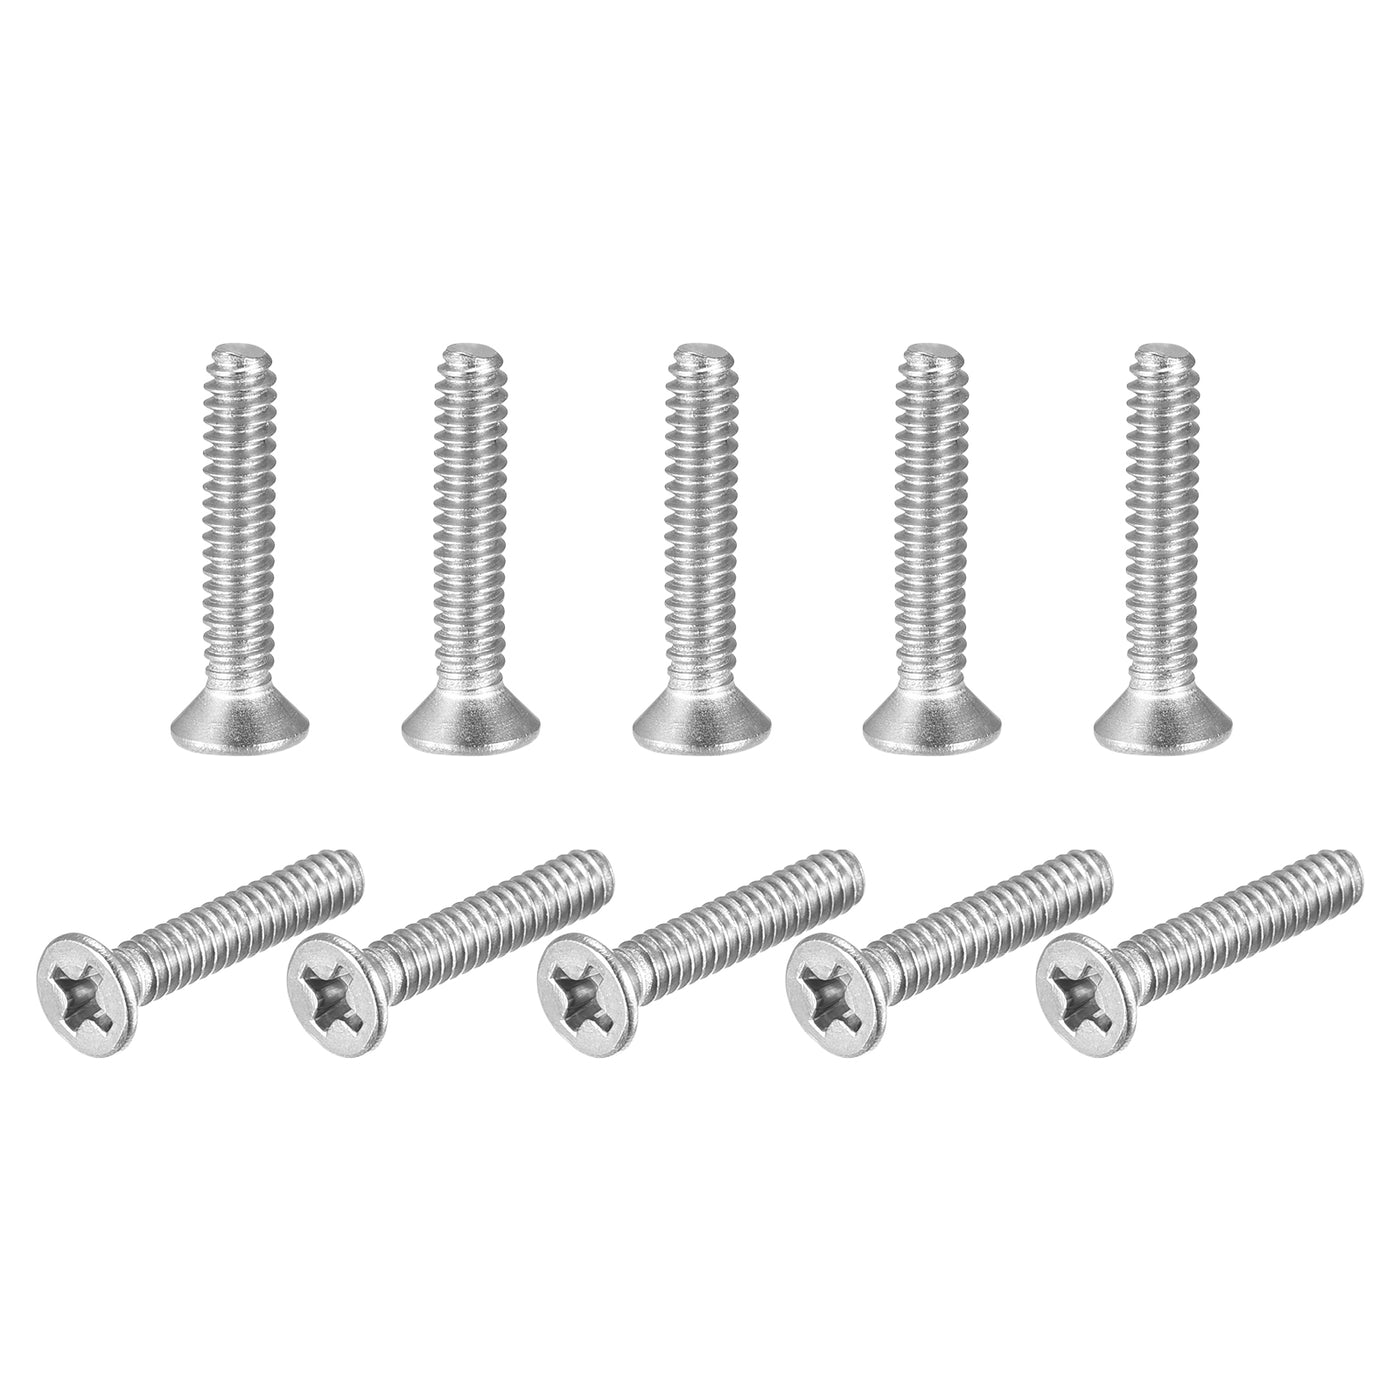 Uxcell Uxcell 6#-32x7/8" Flat Head Machine Screws Phillips 304 Stainless Steel Bolts 150pcs